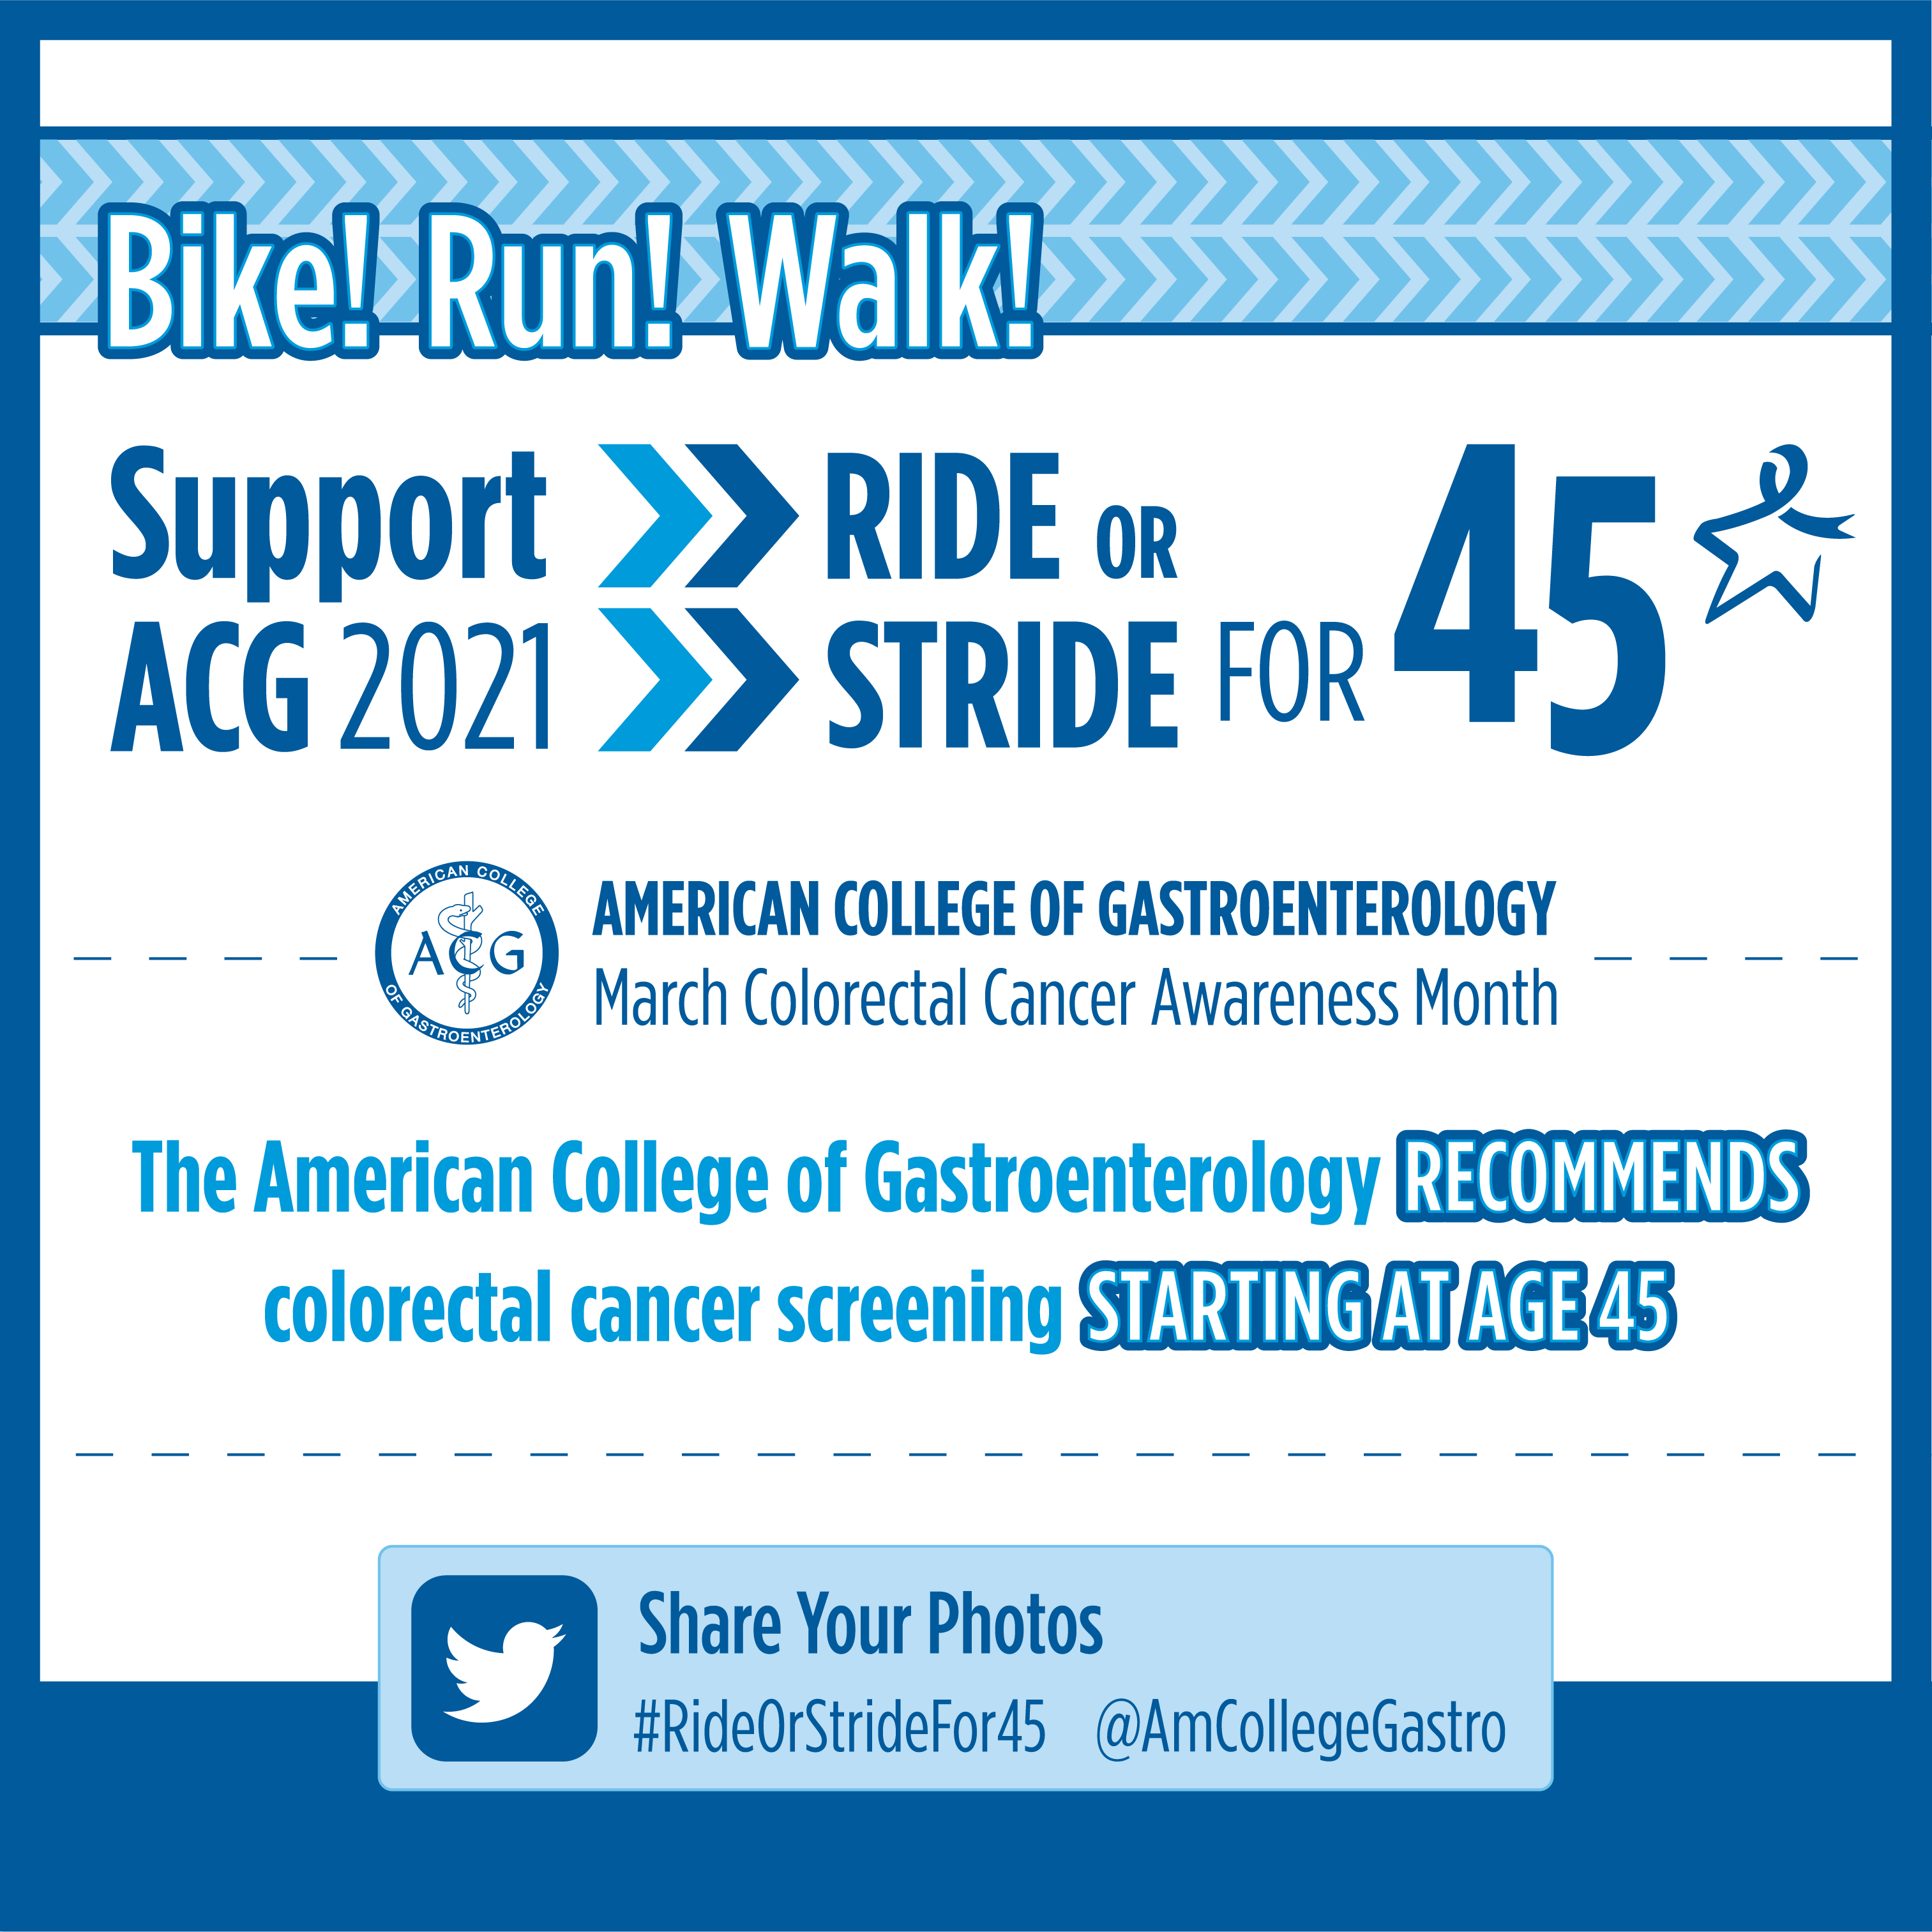 ACG "Ride or Stride for 45" in March 2021 American College of